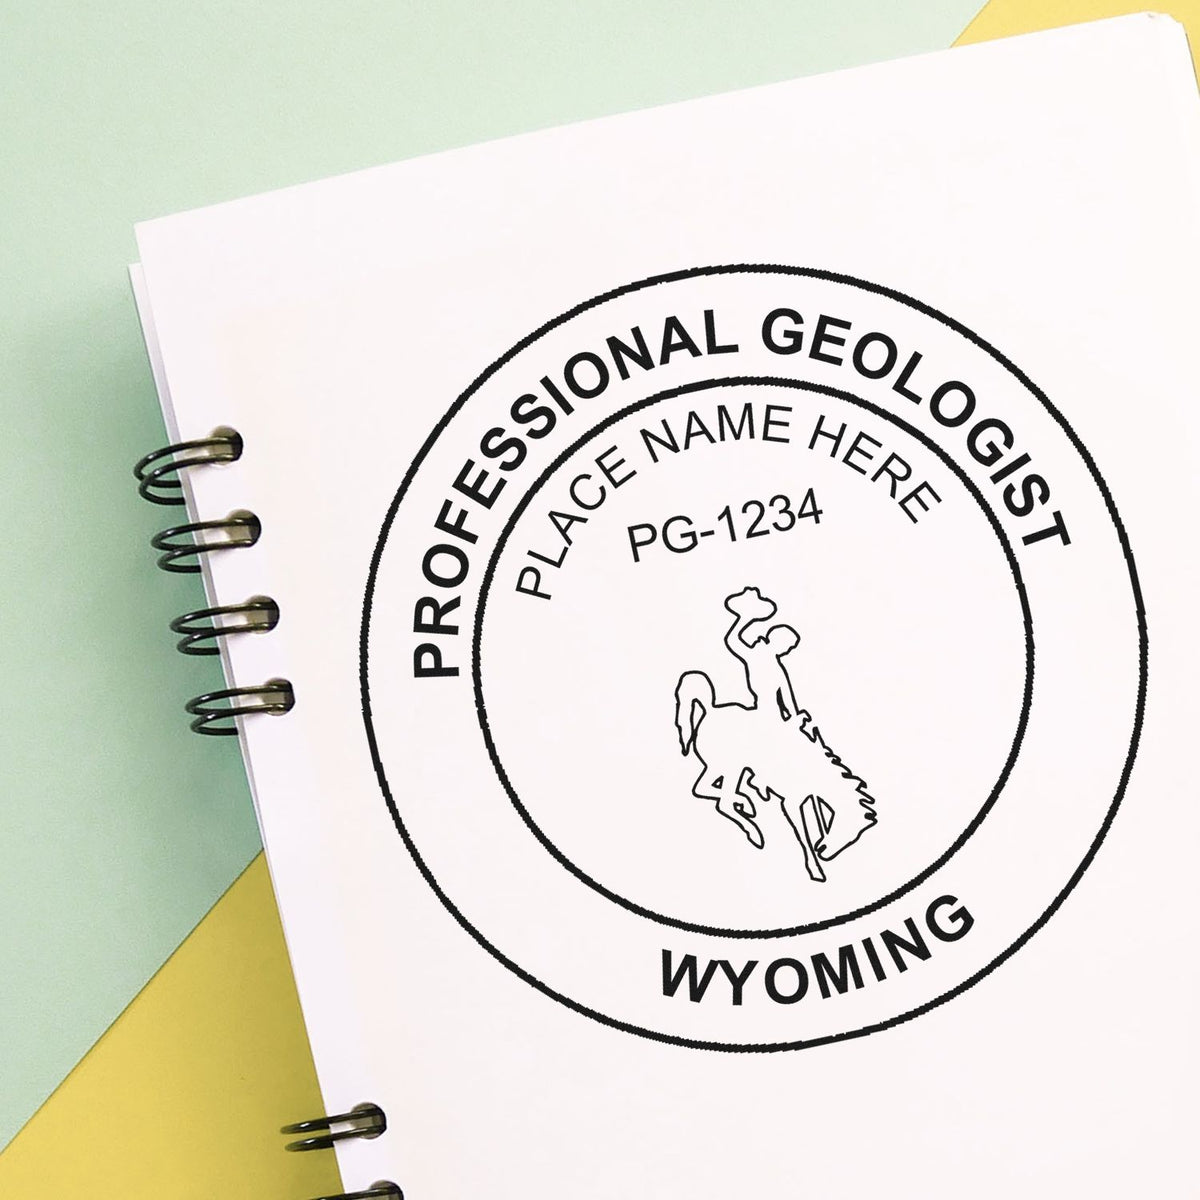 A photograph of the Wyoming Professional Geologist Seal Stamp stamp impression reveals a vivid, professional image of the on paper.